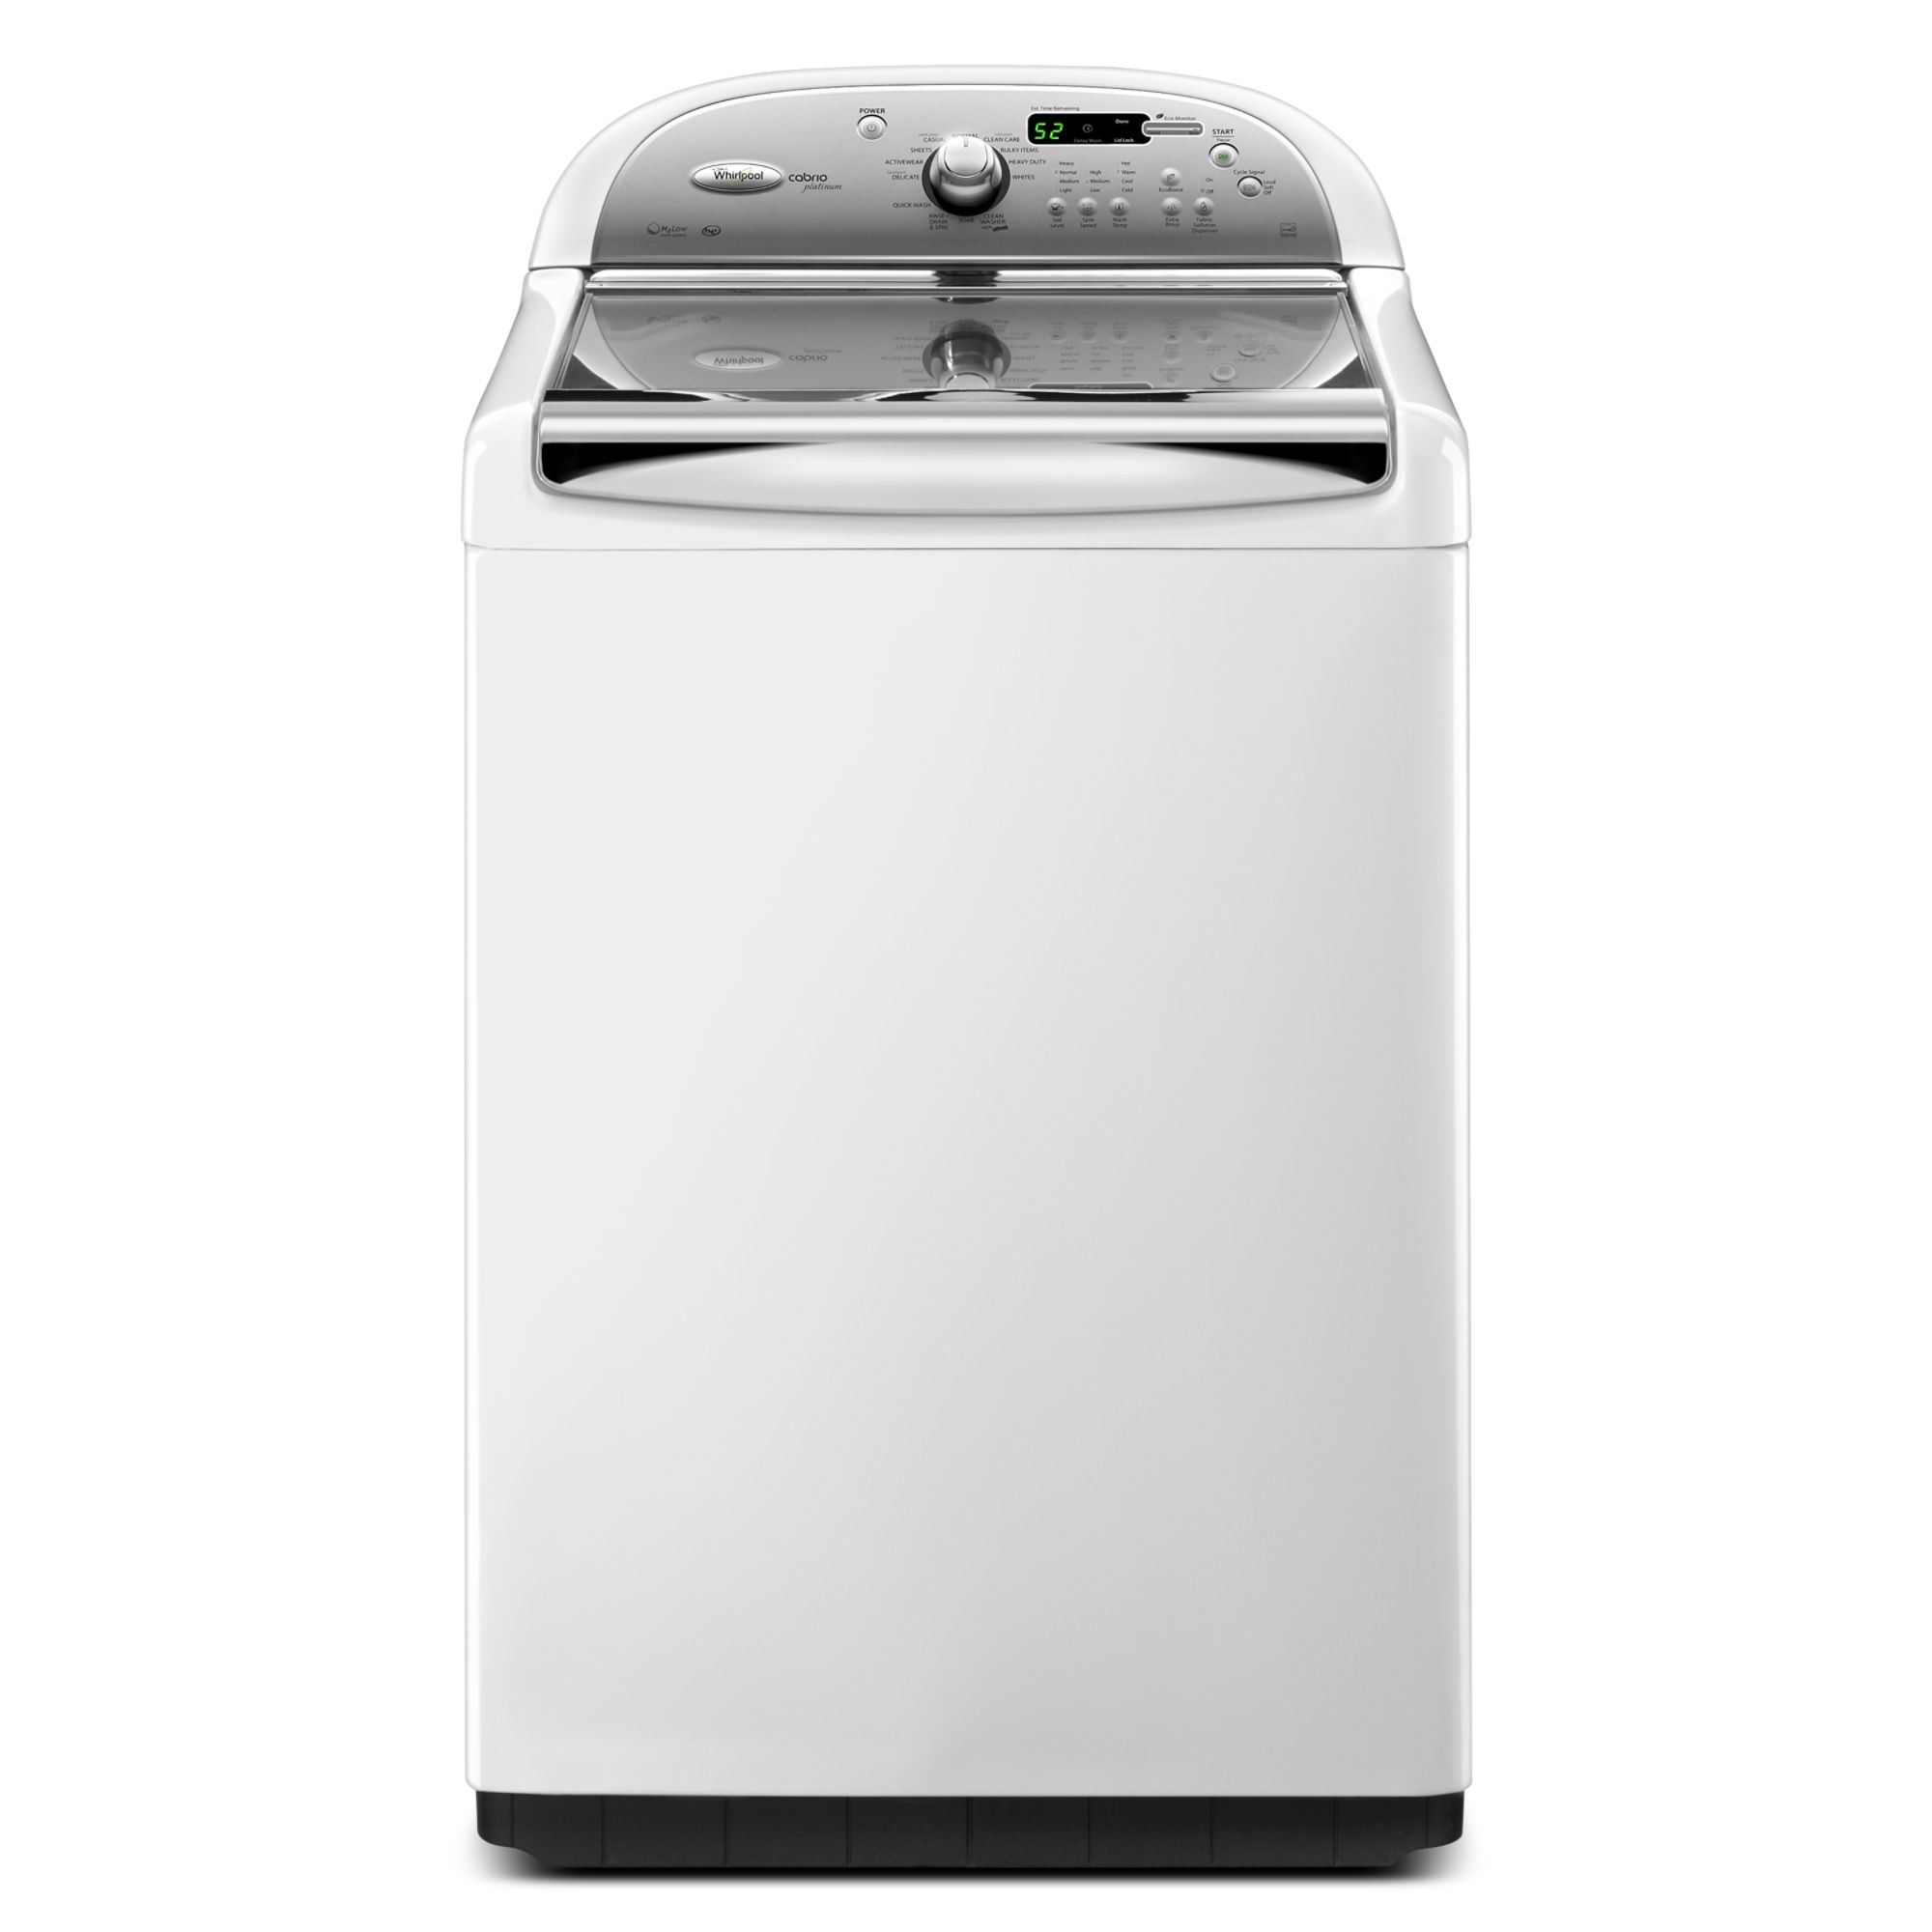 Whirlpool 4.6 cu. ft. High-Efficiency Top-Load Washer w/ Clean Care Cycle - White 4.6 cu.ft. and greater